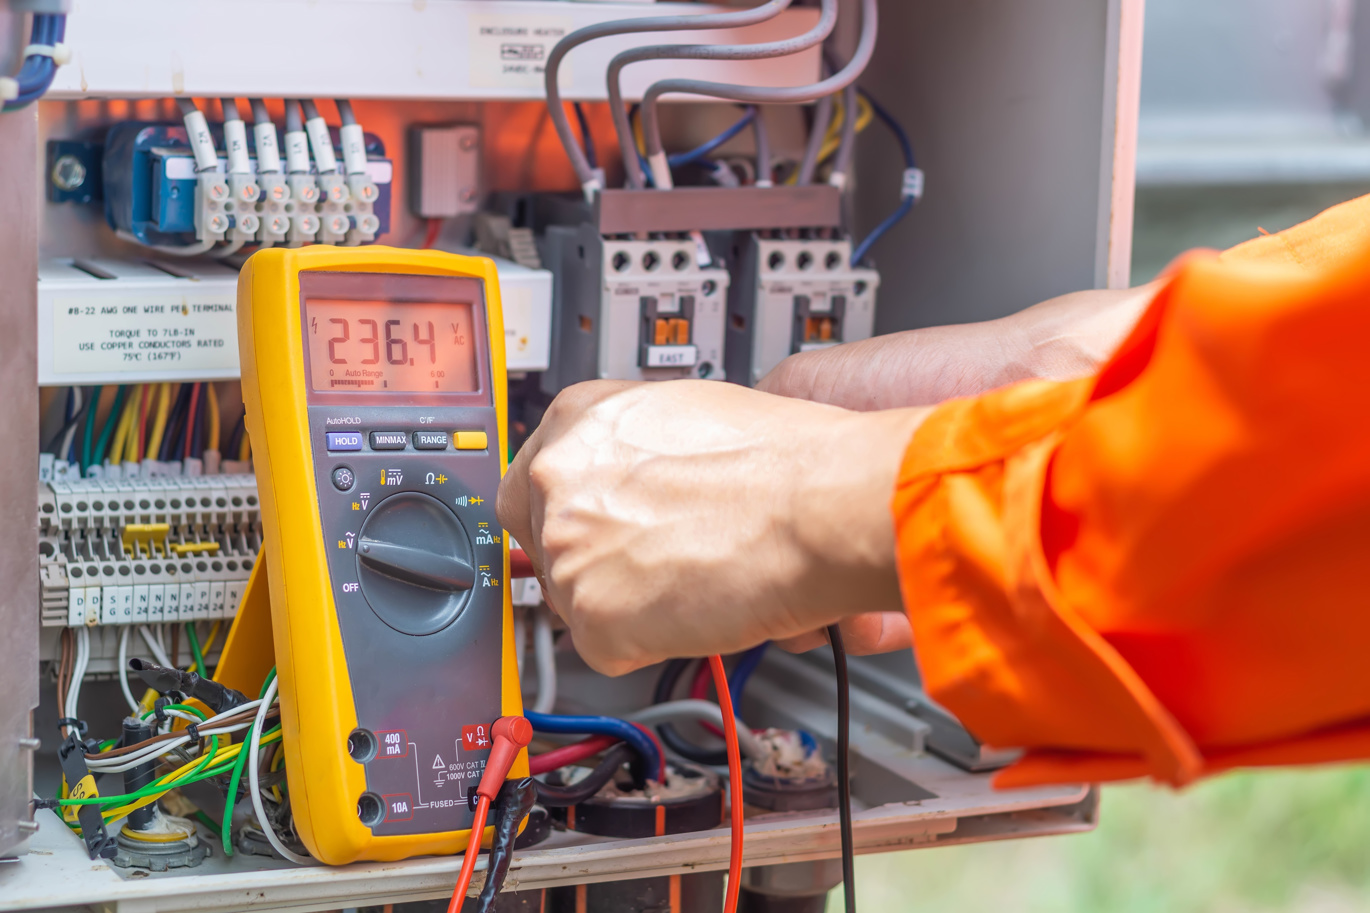 A test engineer wearing an orange uniform using a specialist device to test machinery.